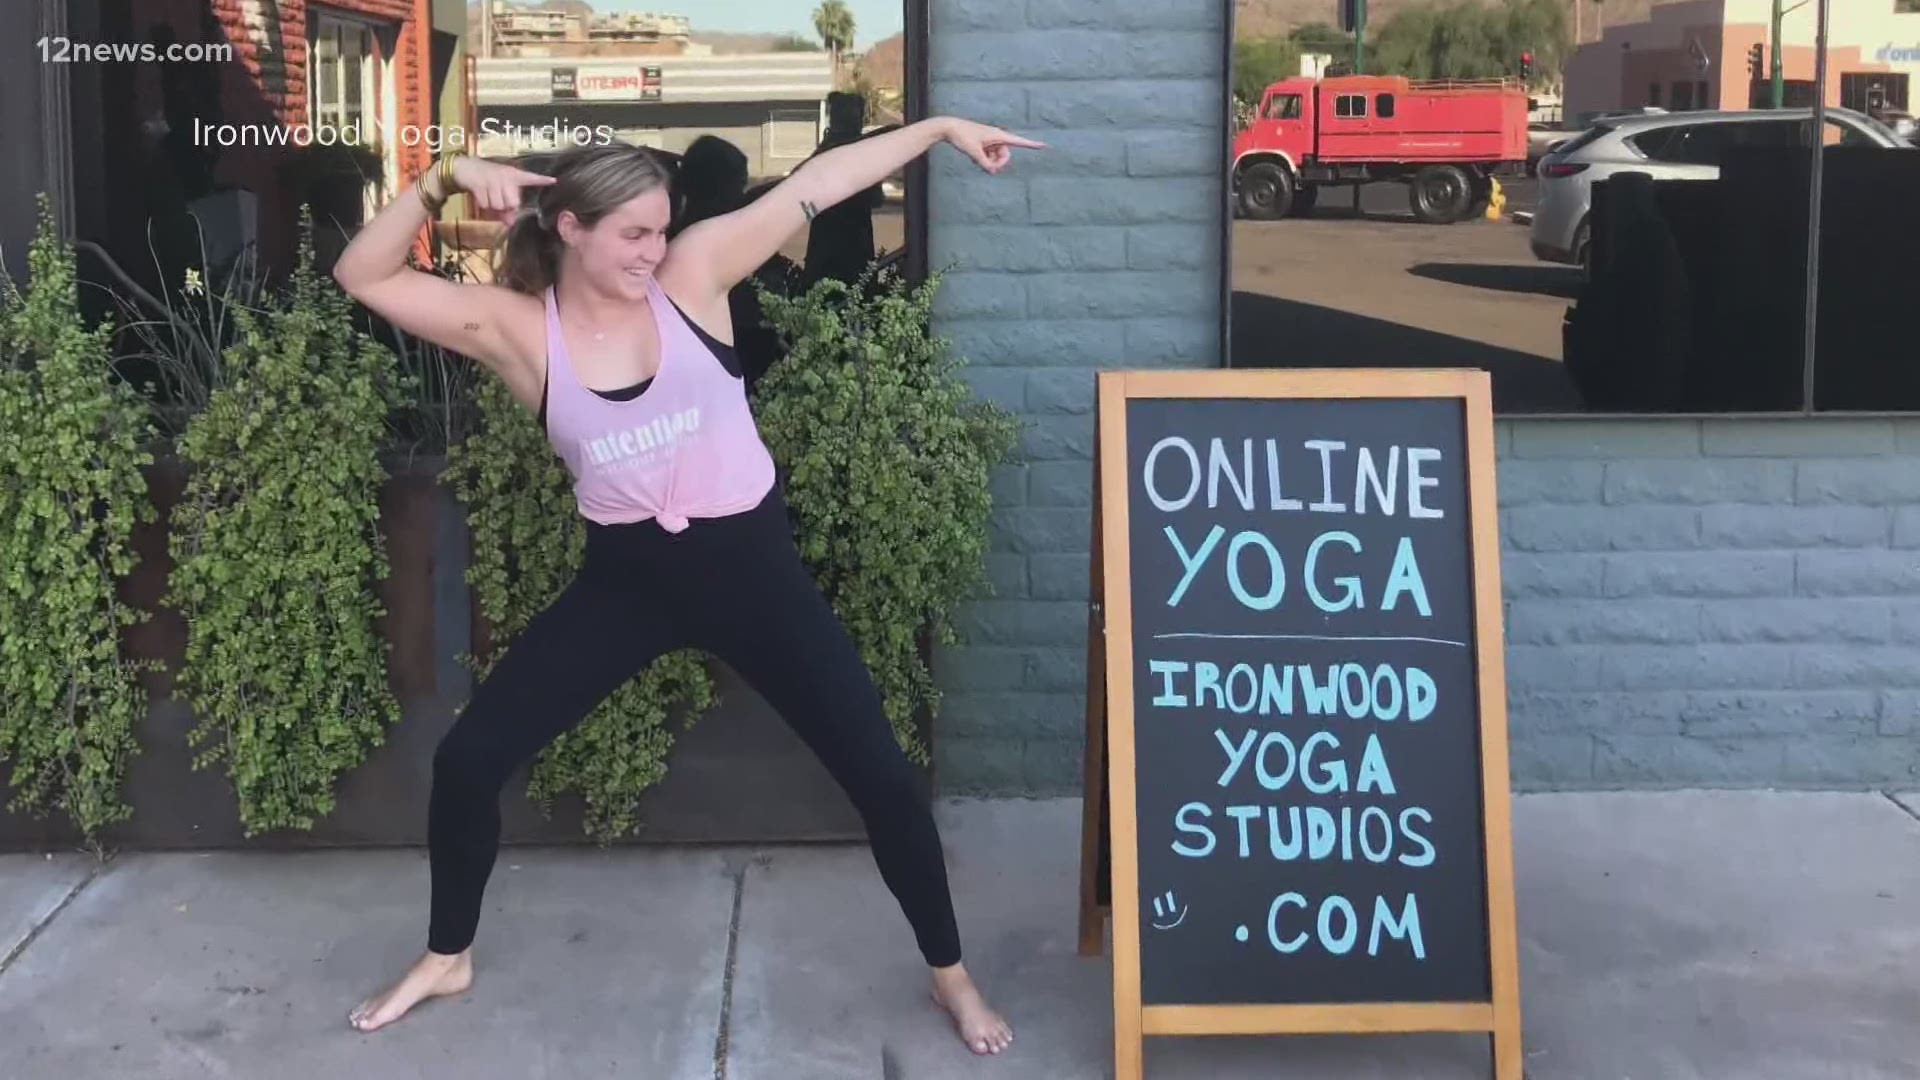 Gyms have been closed in Arizona for weeks now. But instead of shutting down Ironwood Yoga Studios owner Leah Bosworth wasted no time going digital.